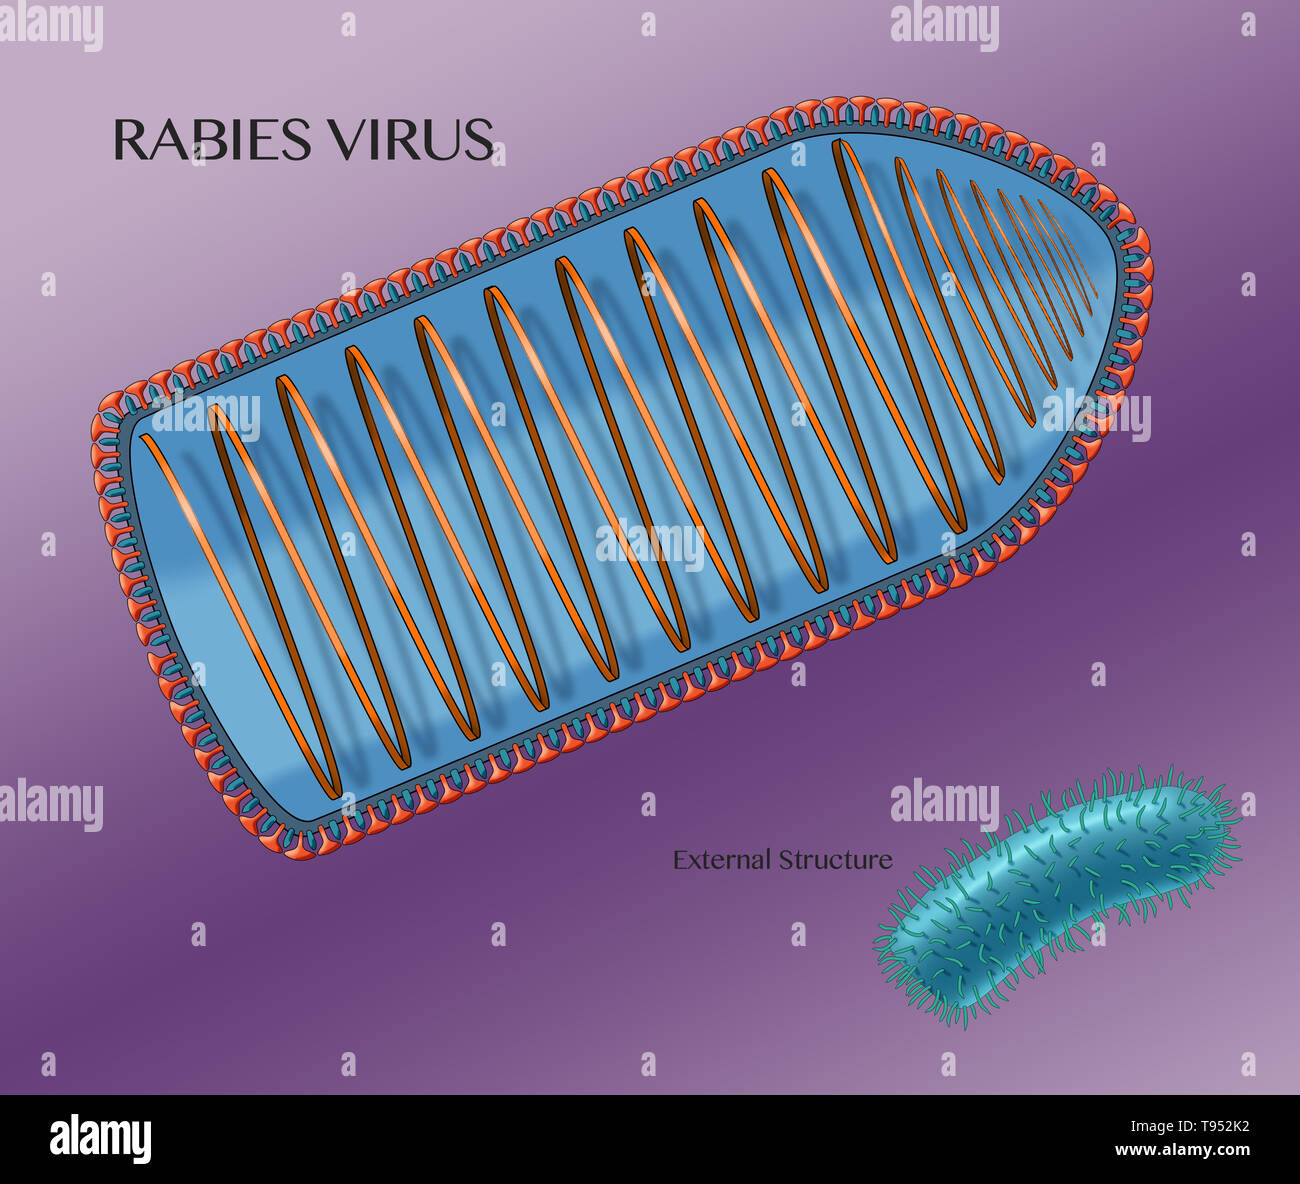 Illustration showing the internal structure of the rabies virus, with the external structure shown in the lower right hand corner. Rabies virus is a neurotropic virus that causes rabies in humans and animals. The rabies virus has a cylindrical morphology and is the type species of the Lyssavirus genus of the Rhabdoviridae family. Stock Photo